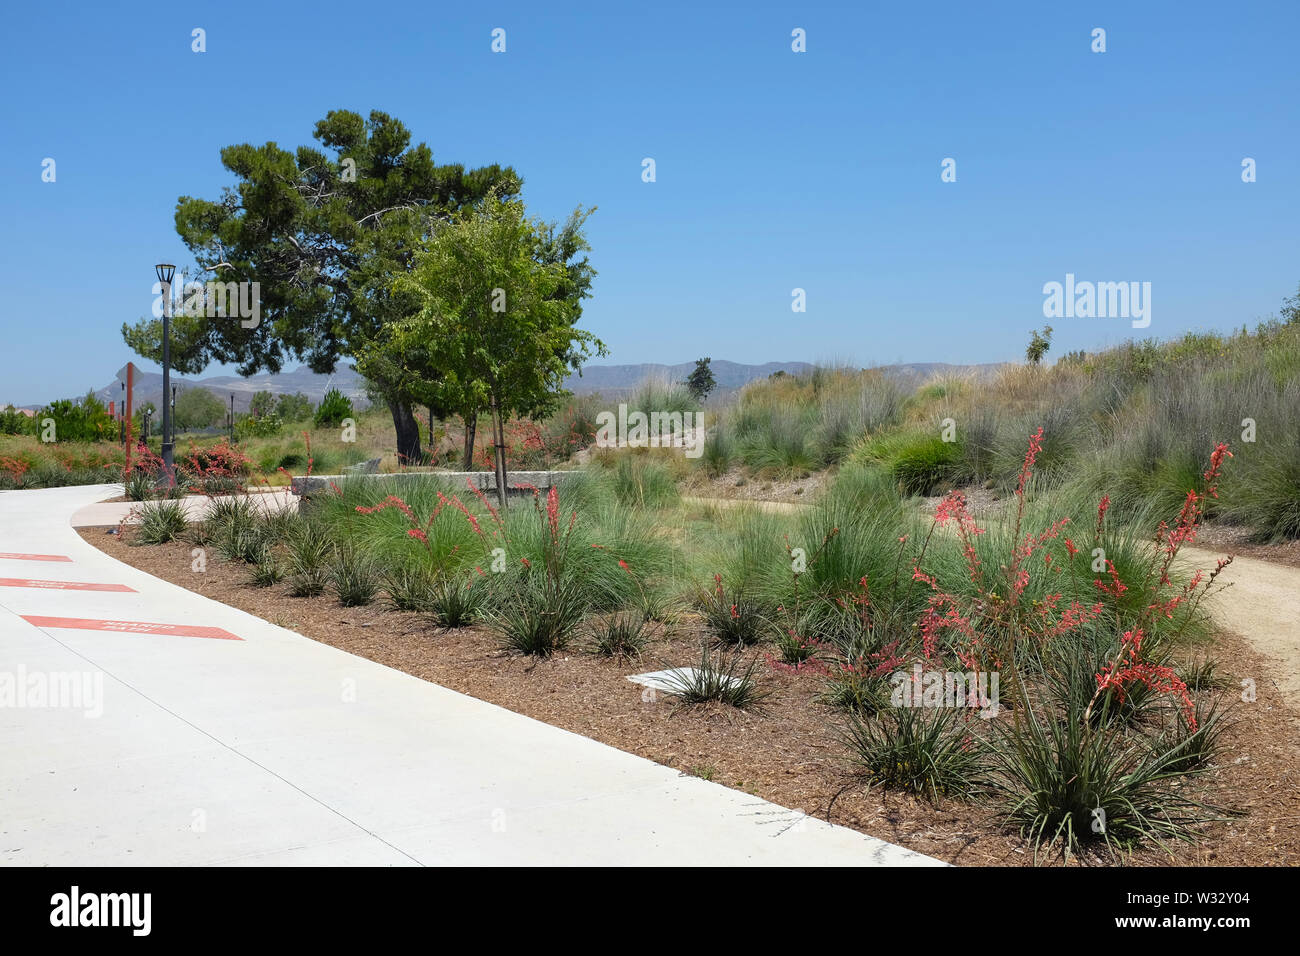 IRIVNE, CALIFORNIA - JULY 11, 2019: Drought tolerant and native plantings along the trail in the Bosque Area of the Great Park. Stock Photo